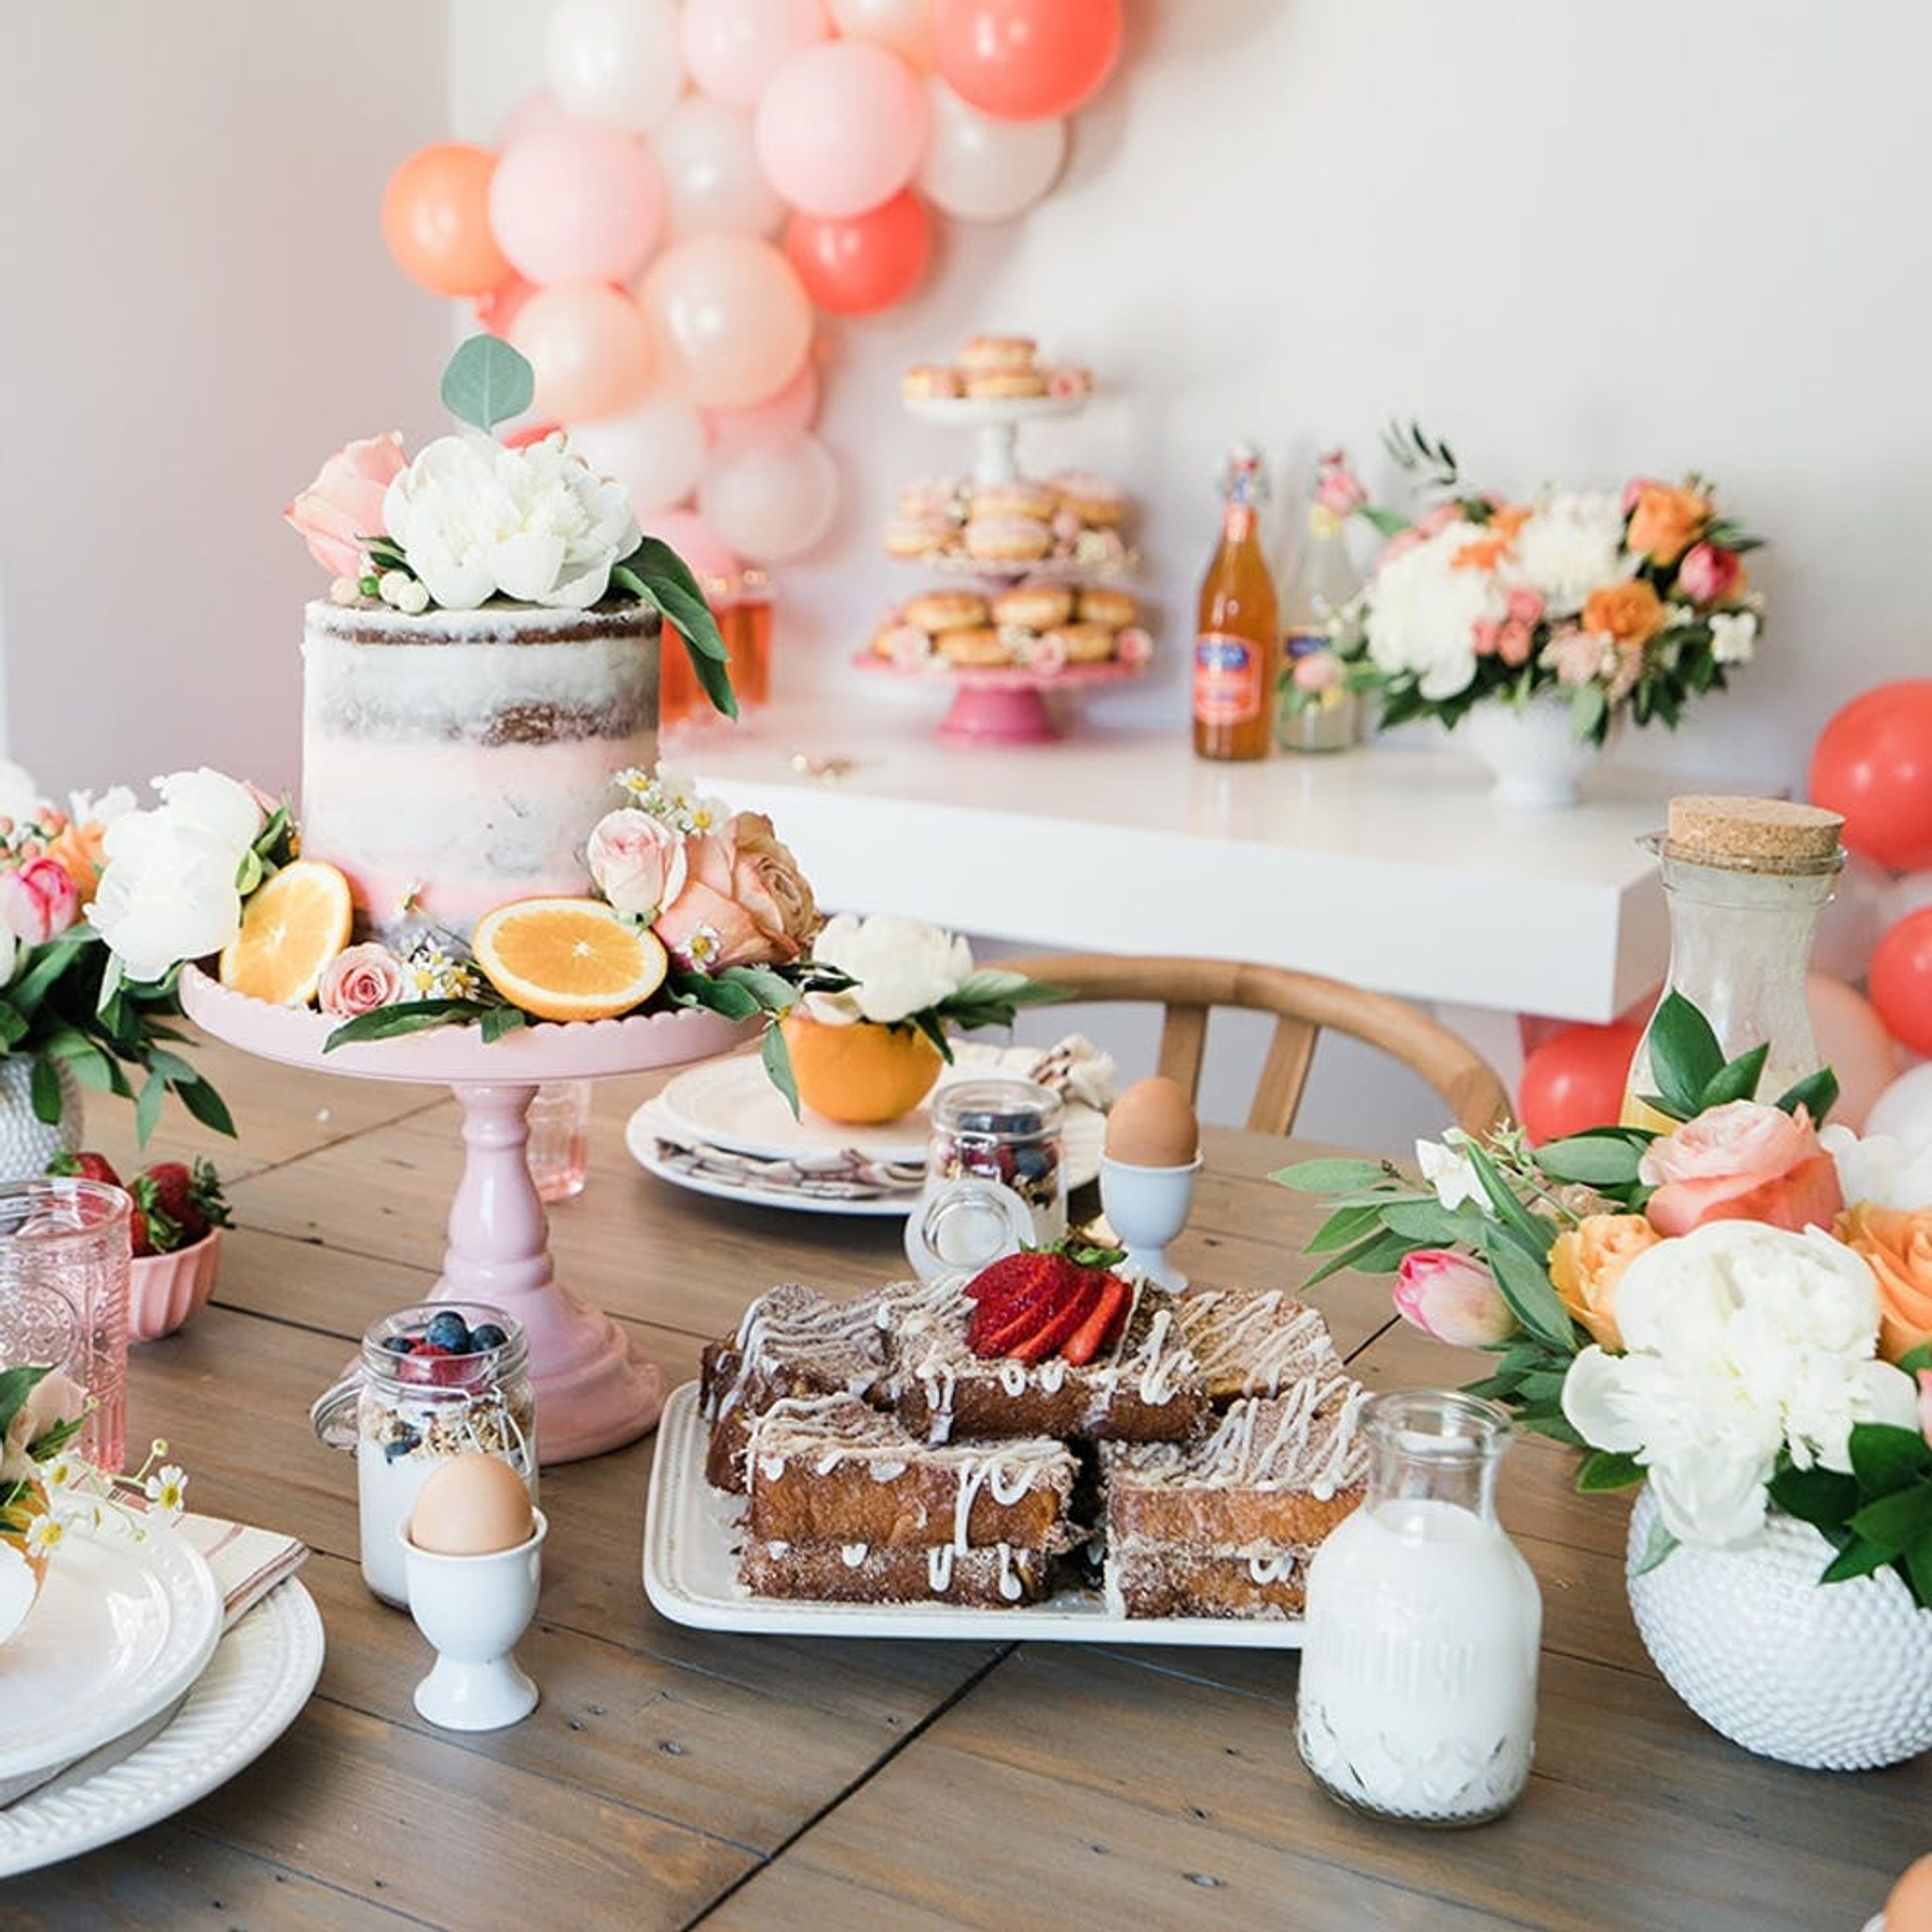 This Blogger’s Bridal Brunch Is a Wonderland of Pink and Pastries